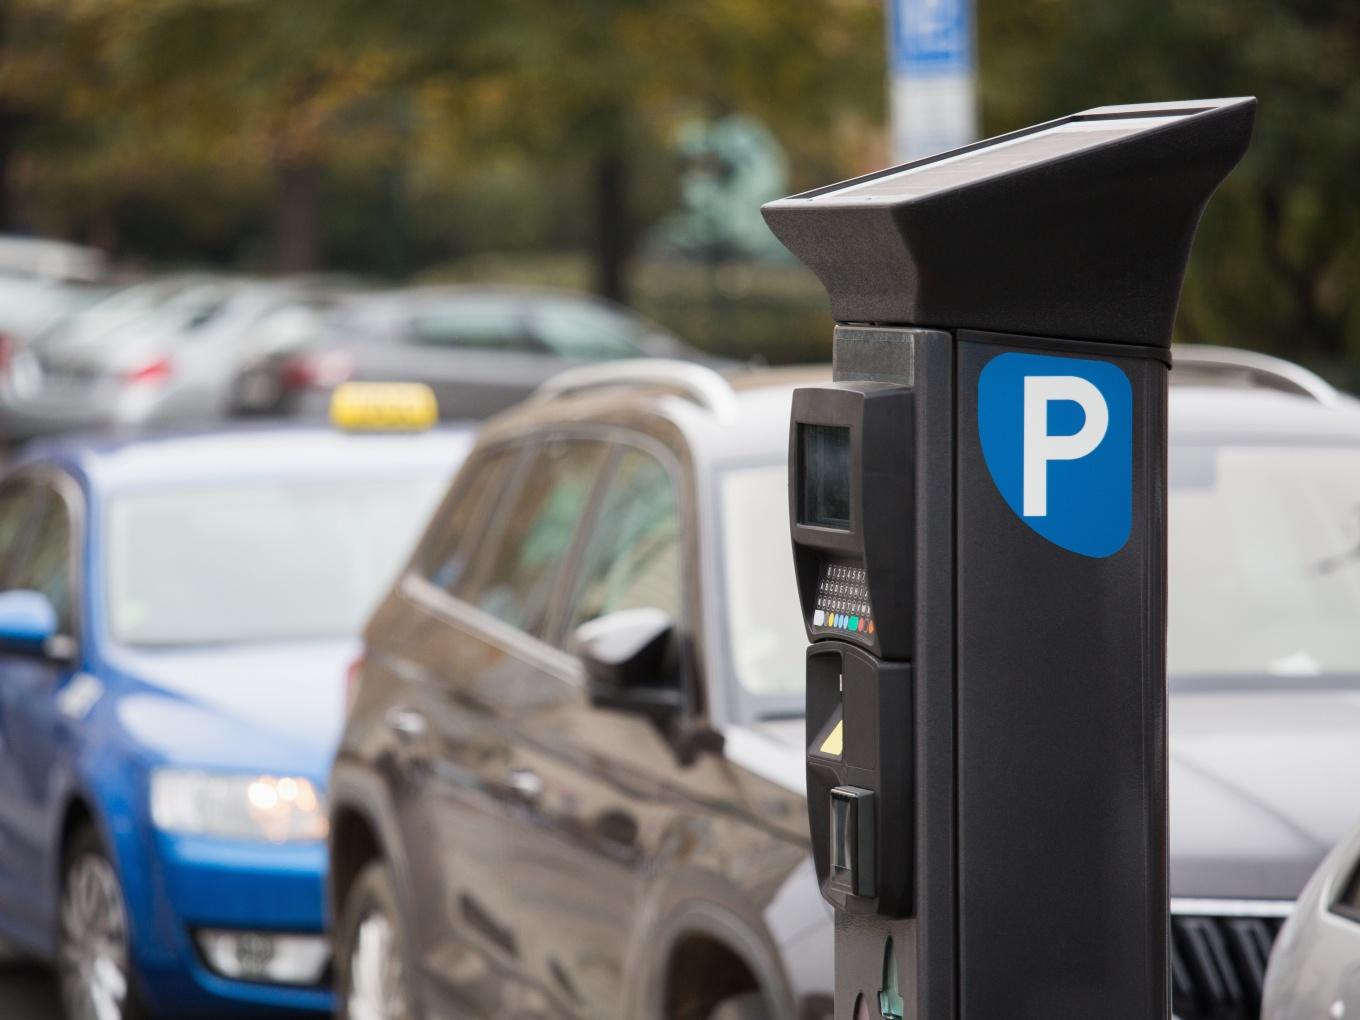 Get My Parking Raises $6 Mn From IvyCap To Tap Global Smart Parking Opportunity